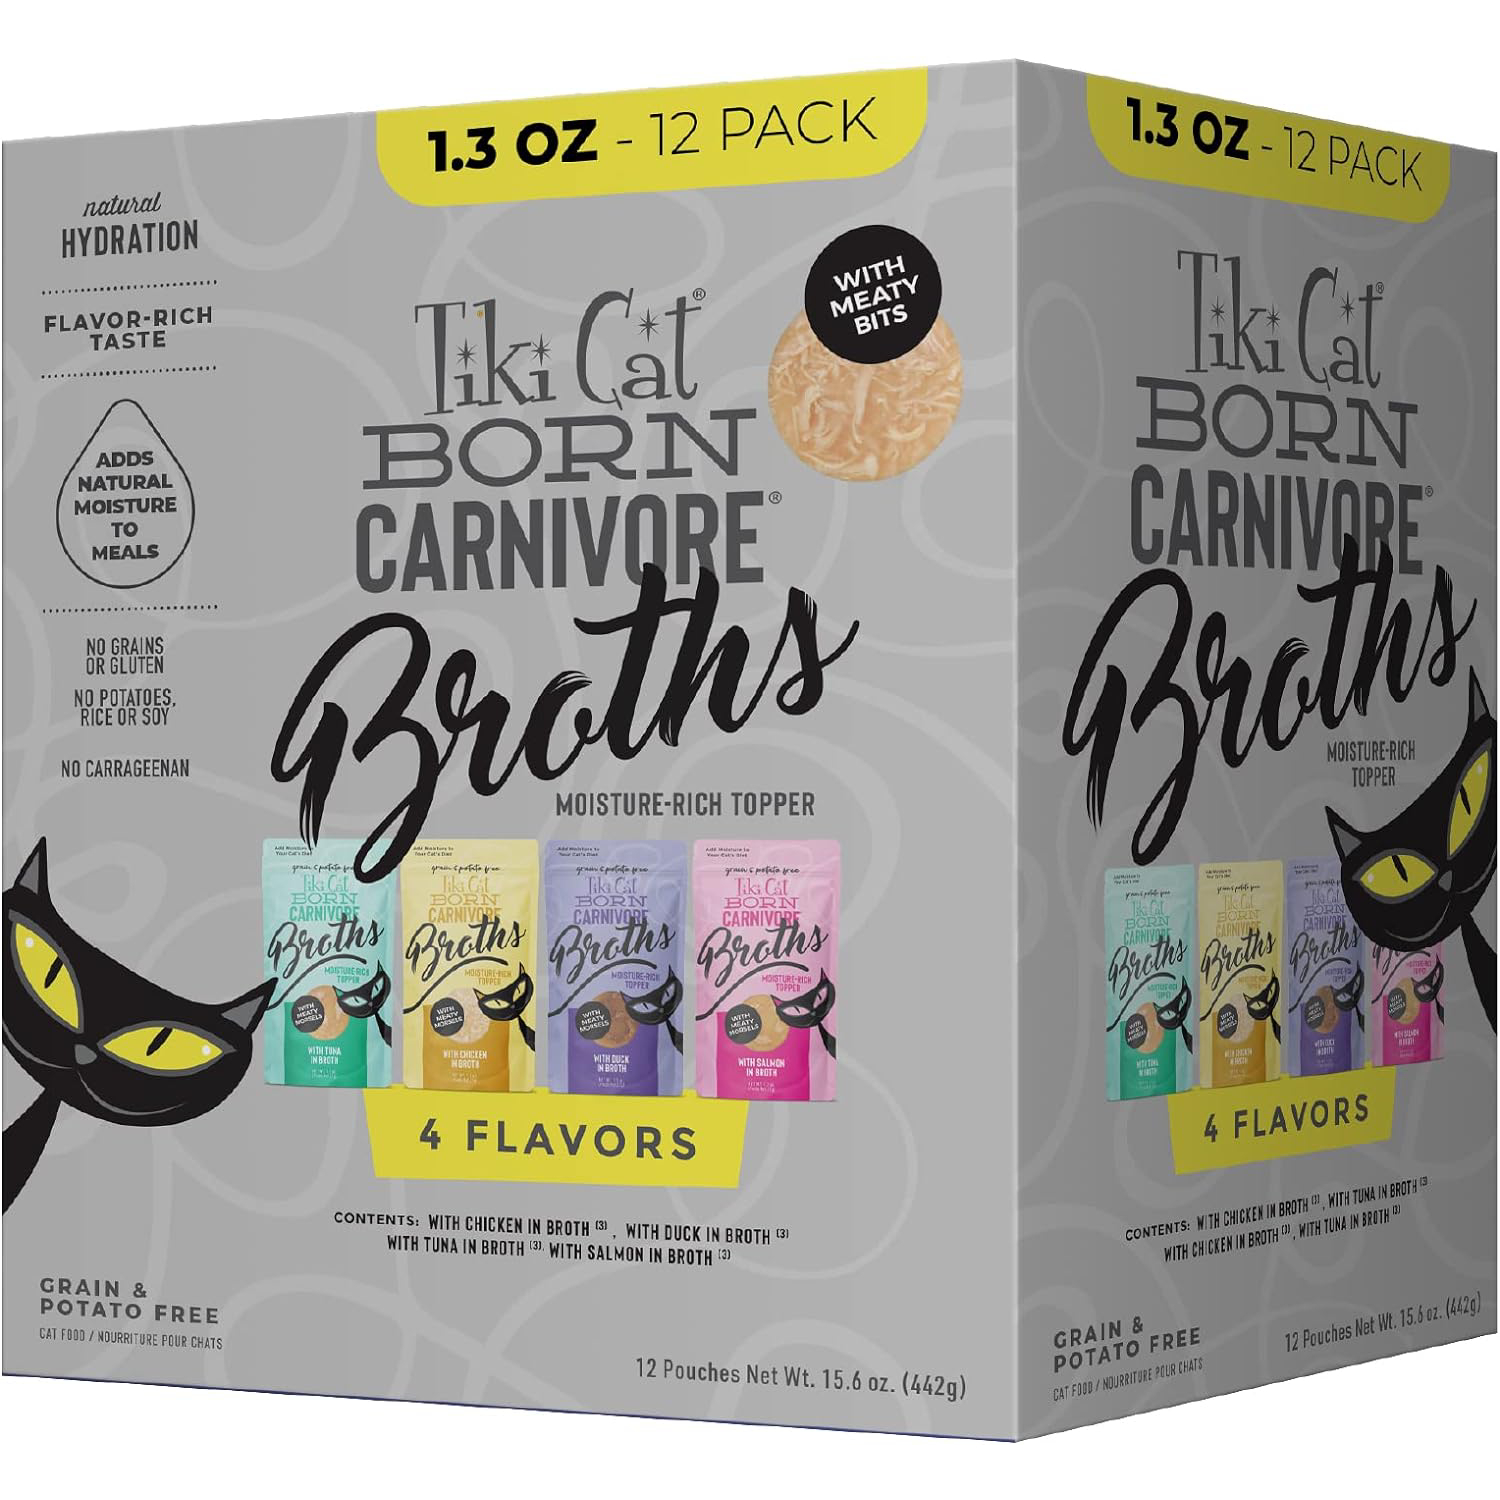 Tiki Cat Born Carnivore Broths Variety Pack, Meaty Bites, Hydration and Flavor Supplement Wet Cat Food Topper, 1.3 oz. Pouch (Pack of 12) new